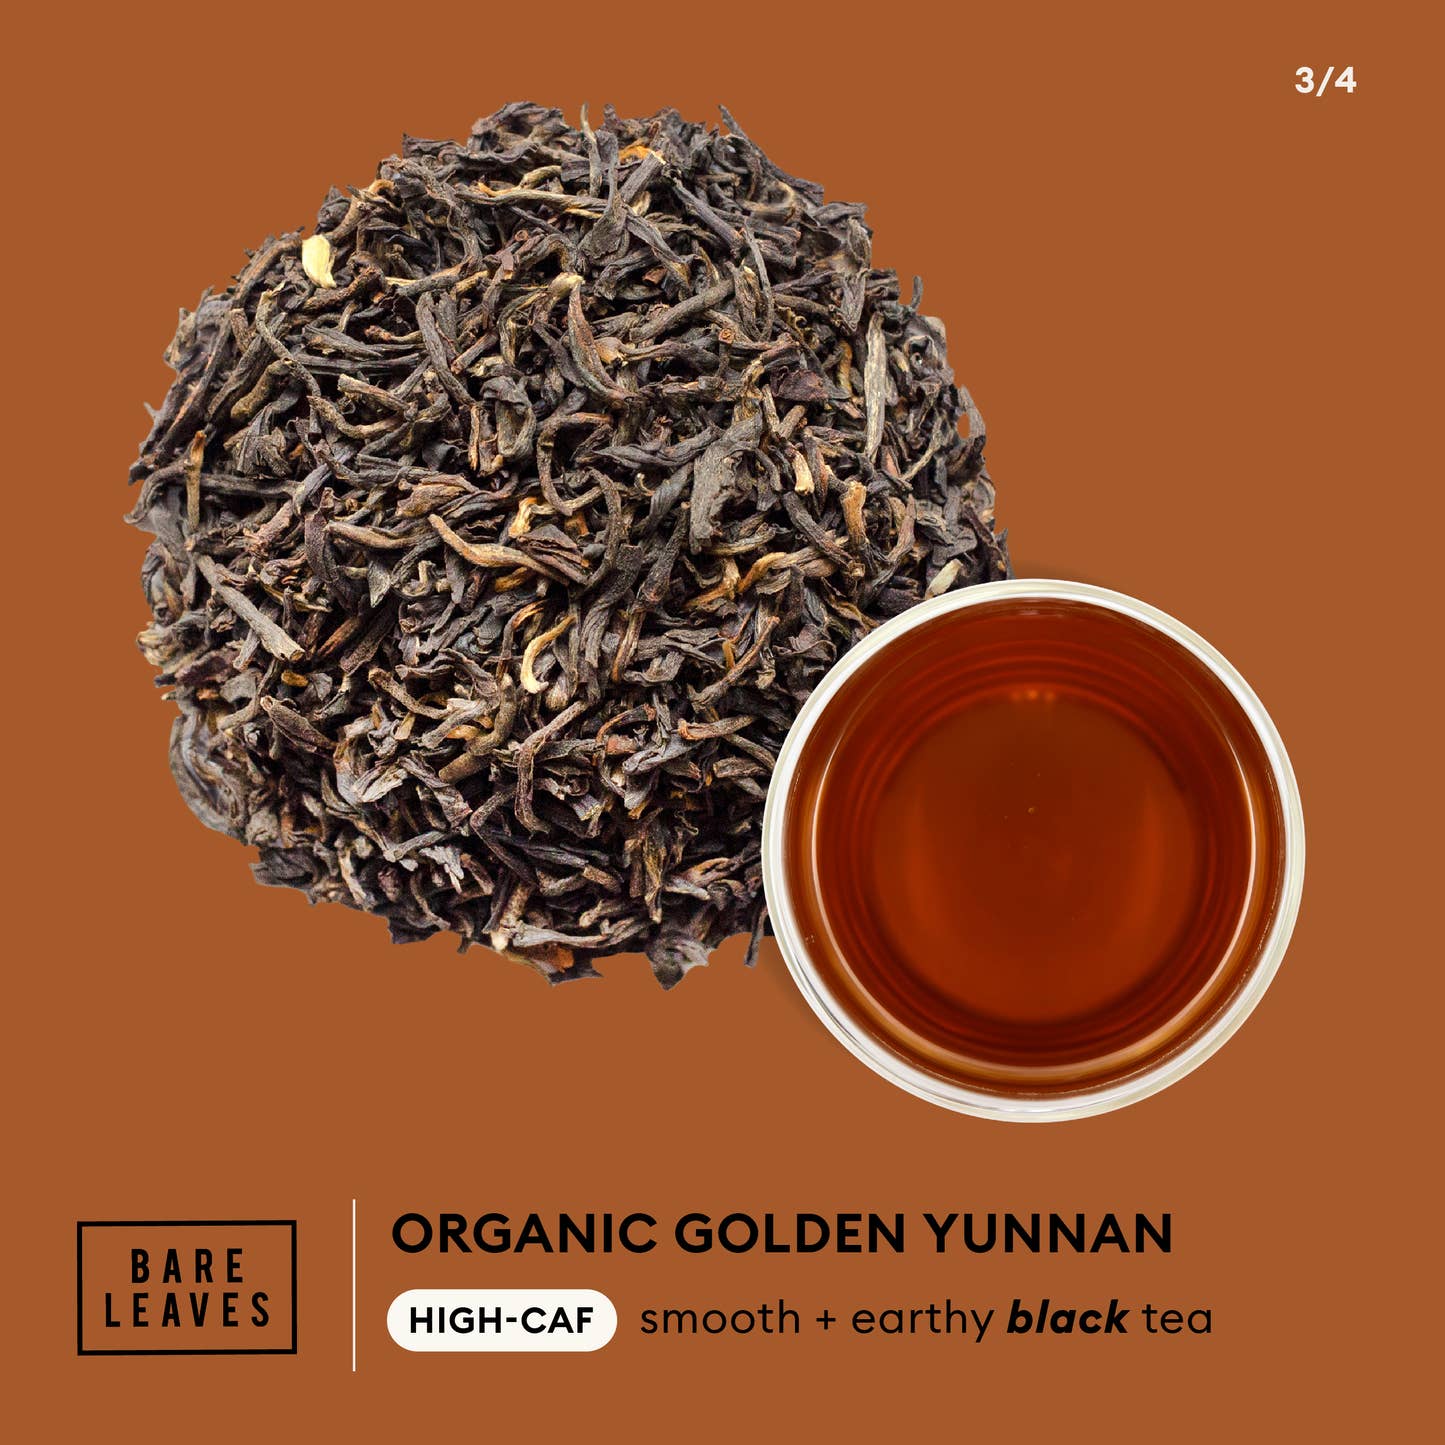 Bare Leaves - Organic Golden Yunnan Black Tea high-caf, smooth + earthy infographic